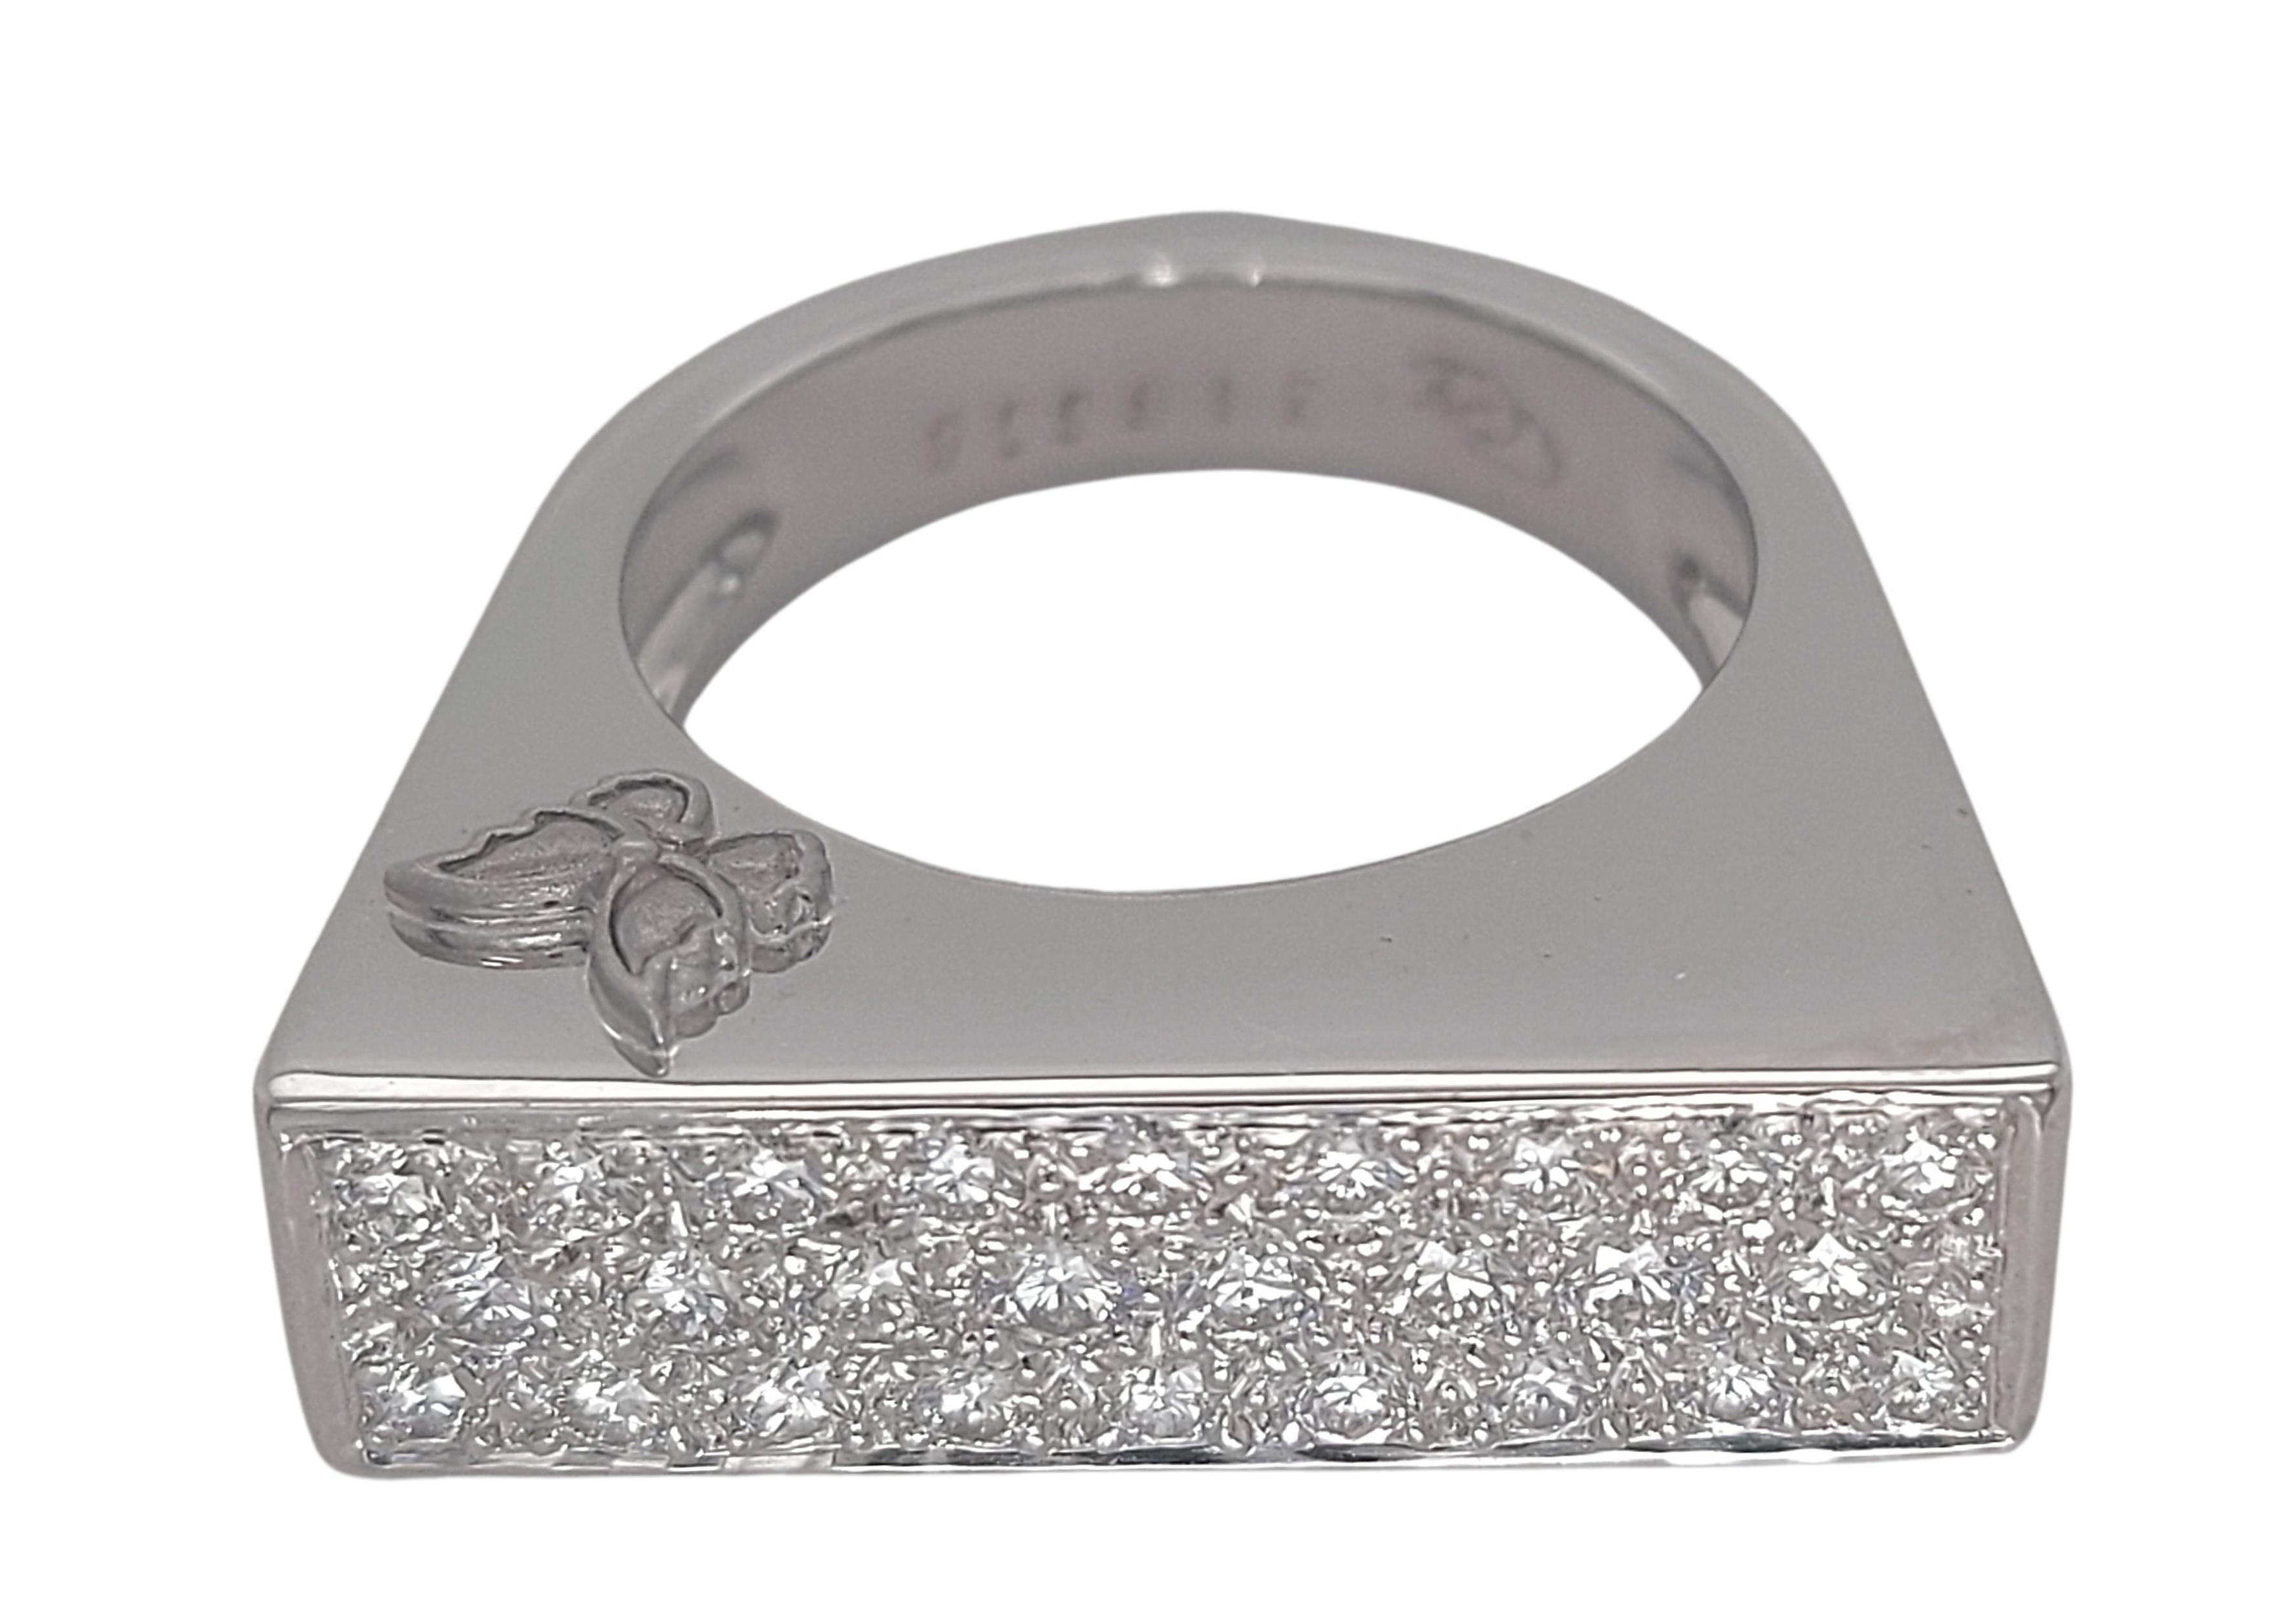 18kt White Gold Carrera Y Carrera Ring With Diamonds and Butterflies Engraved

Diamonds: 26 diamonds

Material: 18kt White Gold

Ring Size: 52.5 EU / 6.25 US (can be resized for free)

Total weight: 10.2 gram / 0.360 oz / 6.6 dwt

This ring is